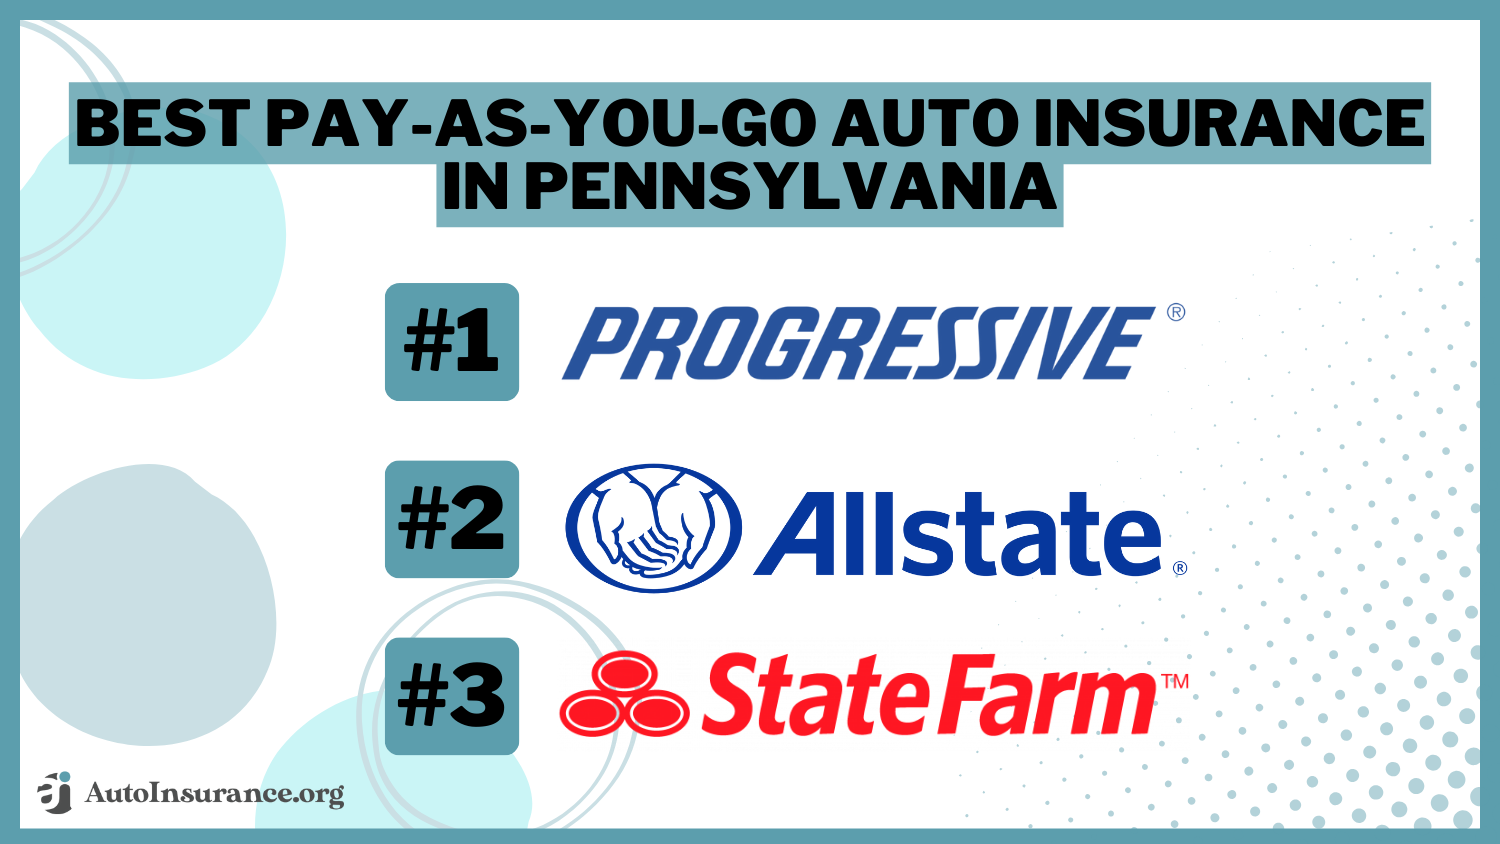 progressive Allstate and state farm are the best pay-as-you-go auto insurance in pennsylvania